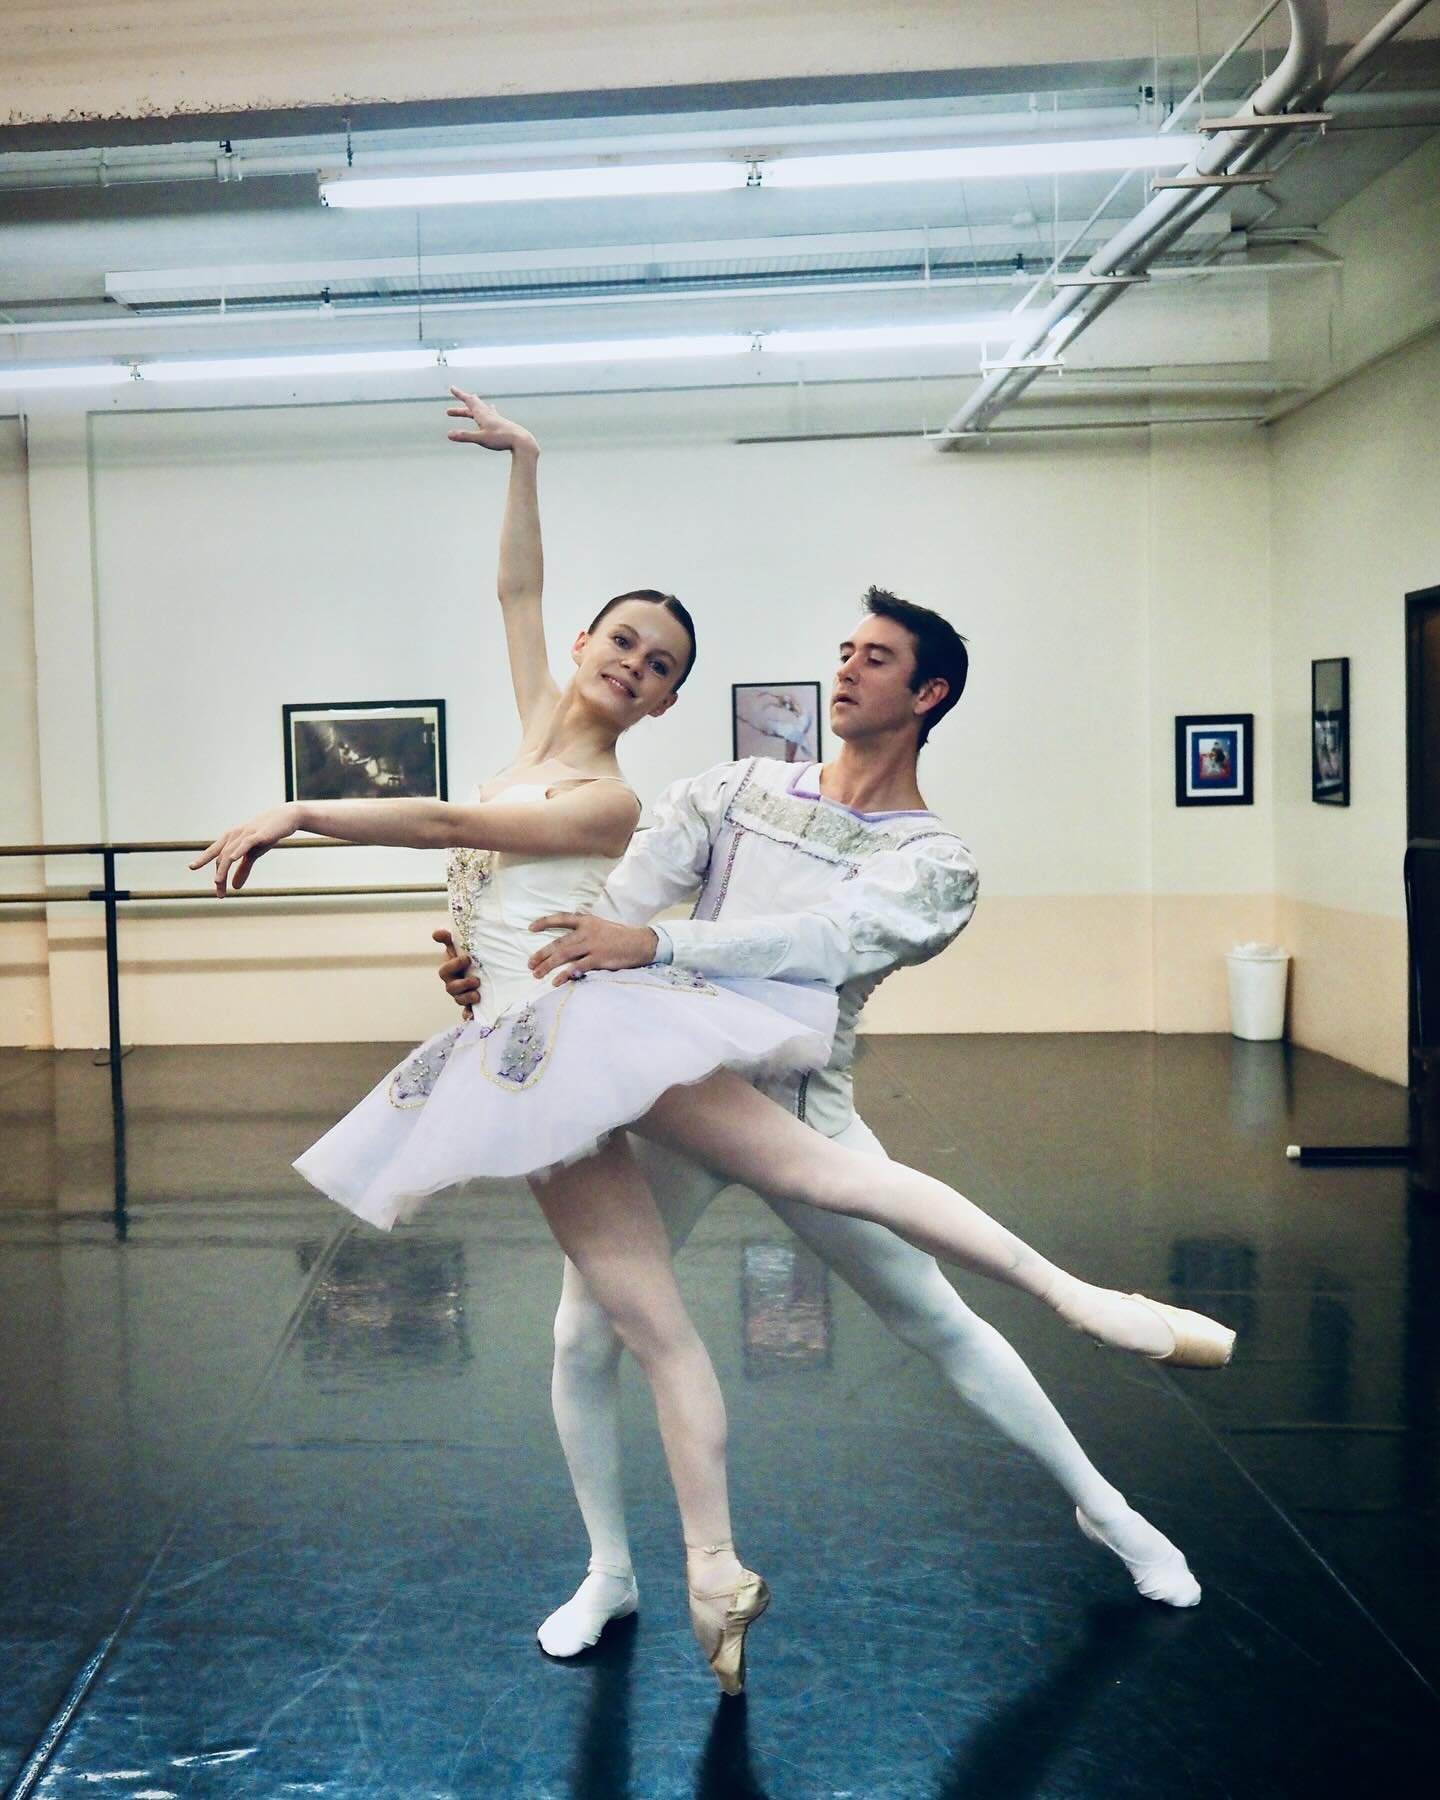 Just two days and very few tickets left to see DAnce ART this Sunday!

Don&rsquo;t miss Jack Stewart and Hanna Chudinova perform Classical Symphony along with advanced Ballet Academy Ventura dancers, plus 6 other neoclassical and contemporary pieces,